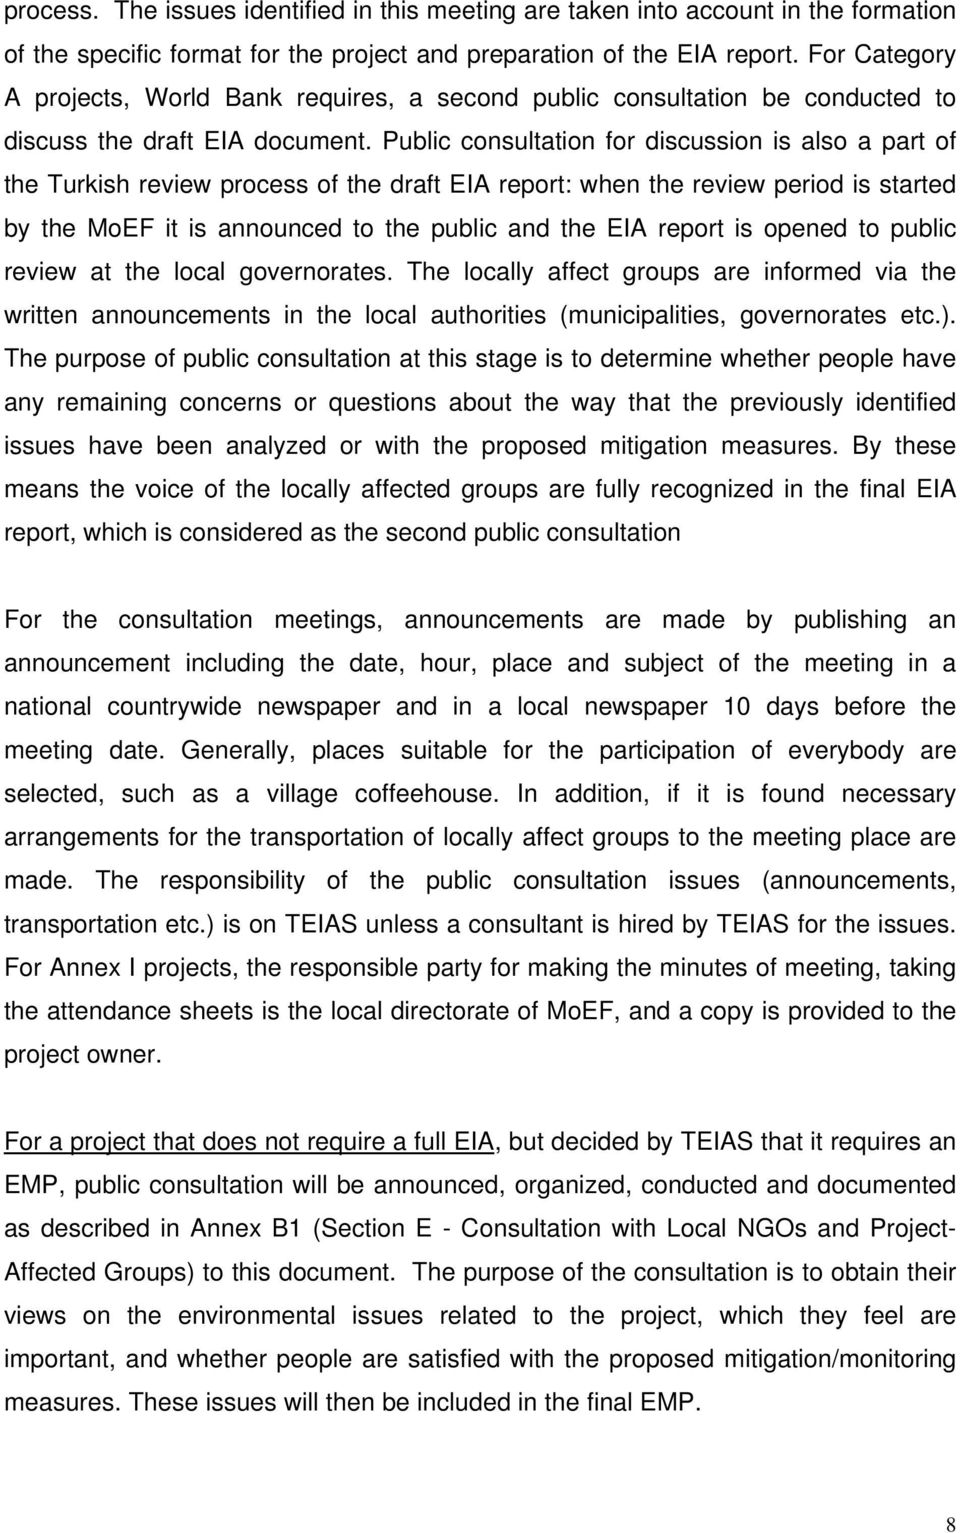 Public consultation for discussion is also a part of the Turkish review process of the draft EIA report: when the review period is started by the MoEF it is announced to the public and the EIA report